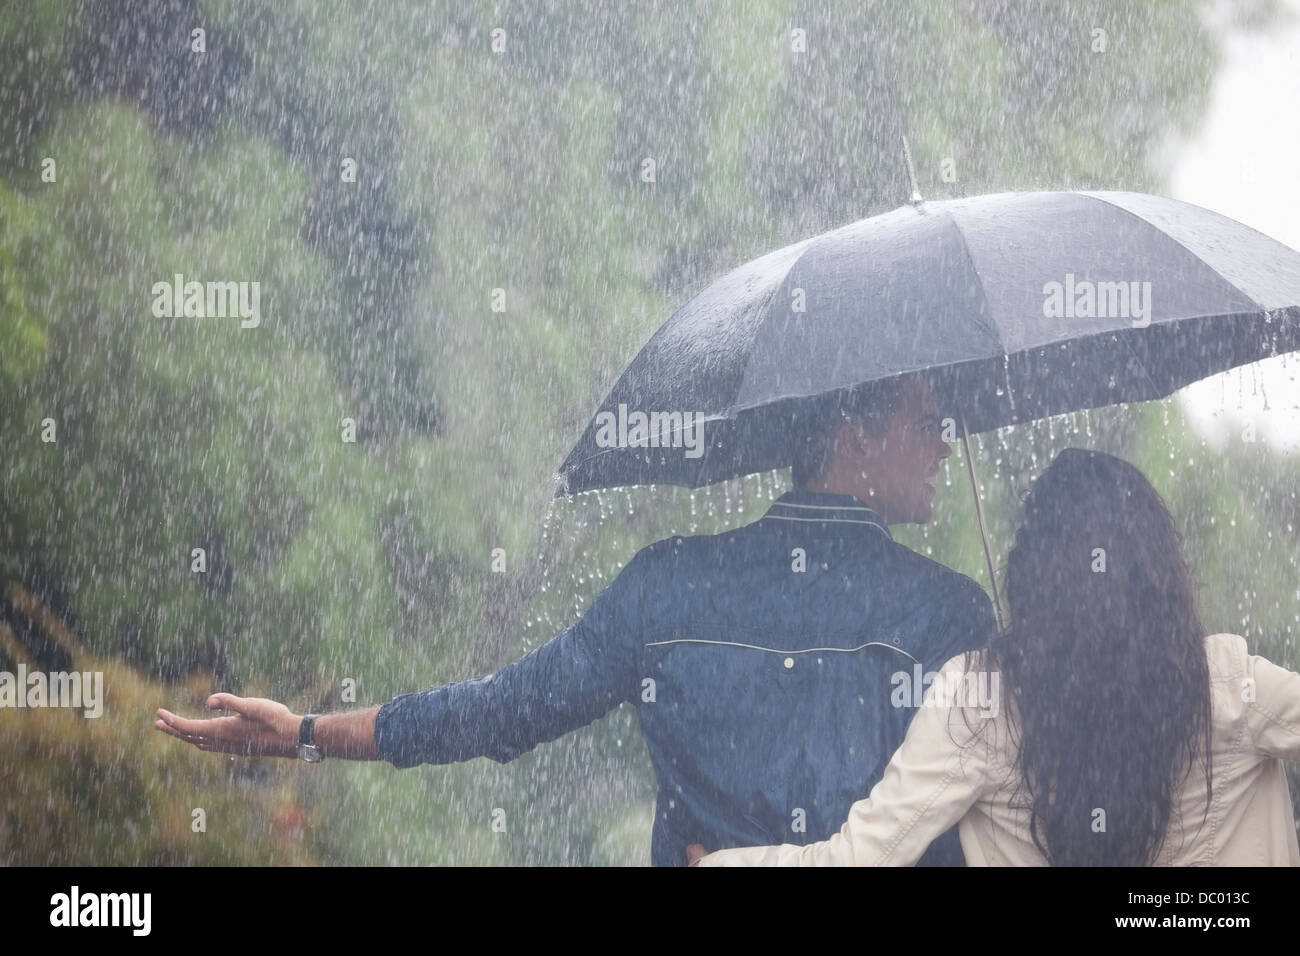 Couple walking with arms outstretched under umbrella in rain Stock Photo